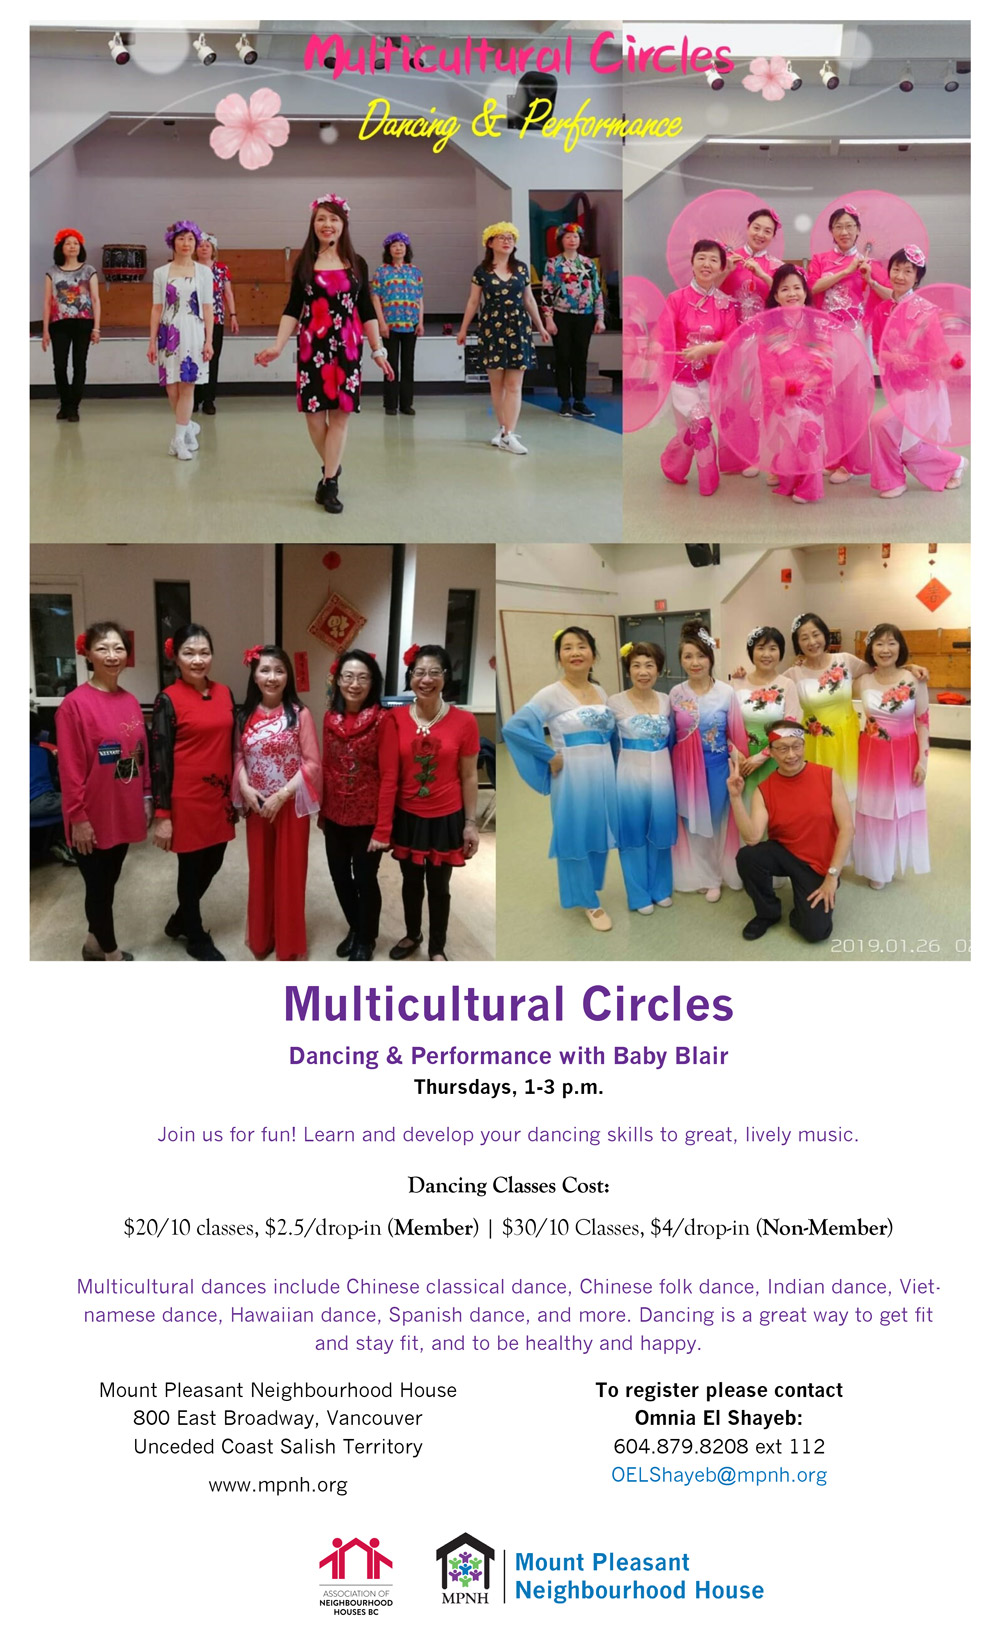 An image of the poster with program details, featuring several photos of people dancing and posing in brightly-coloured clothing.